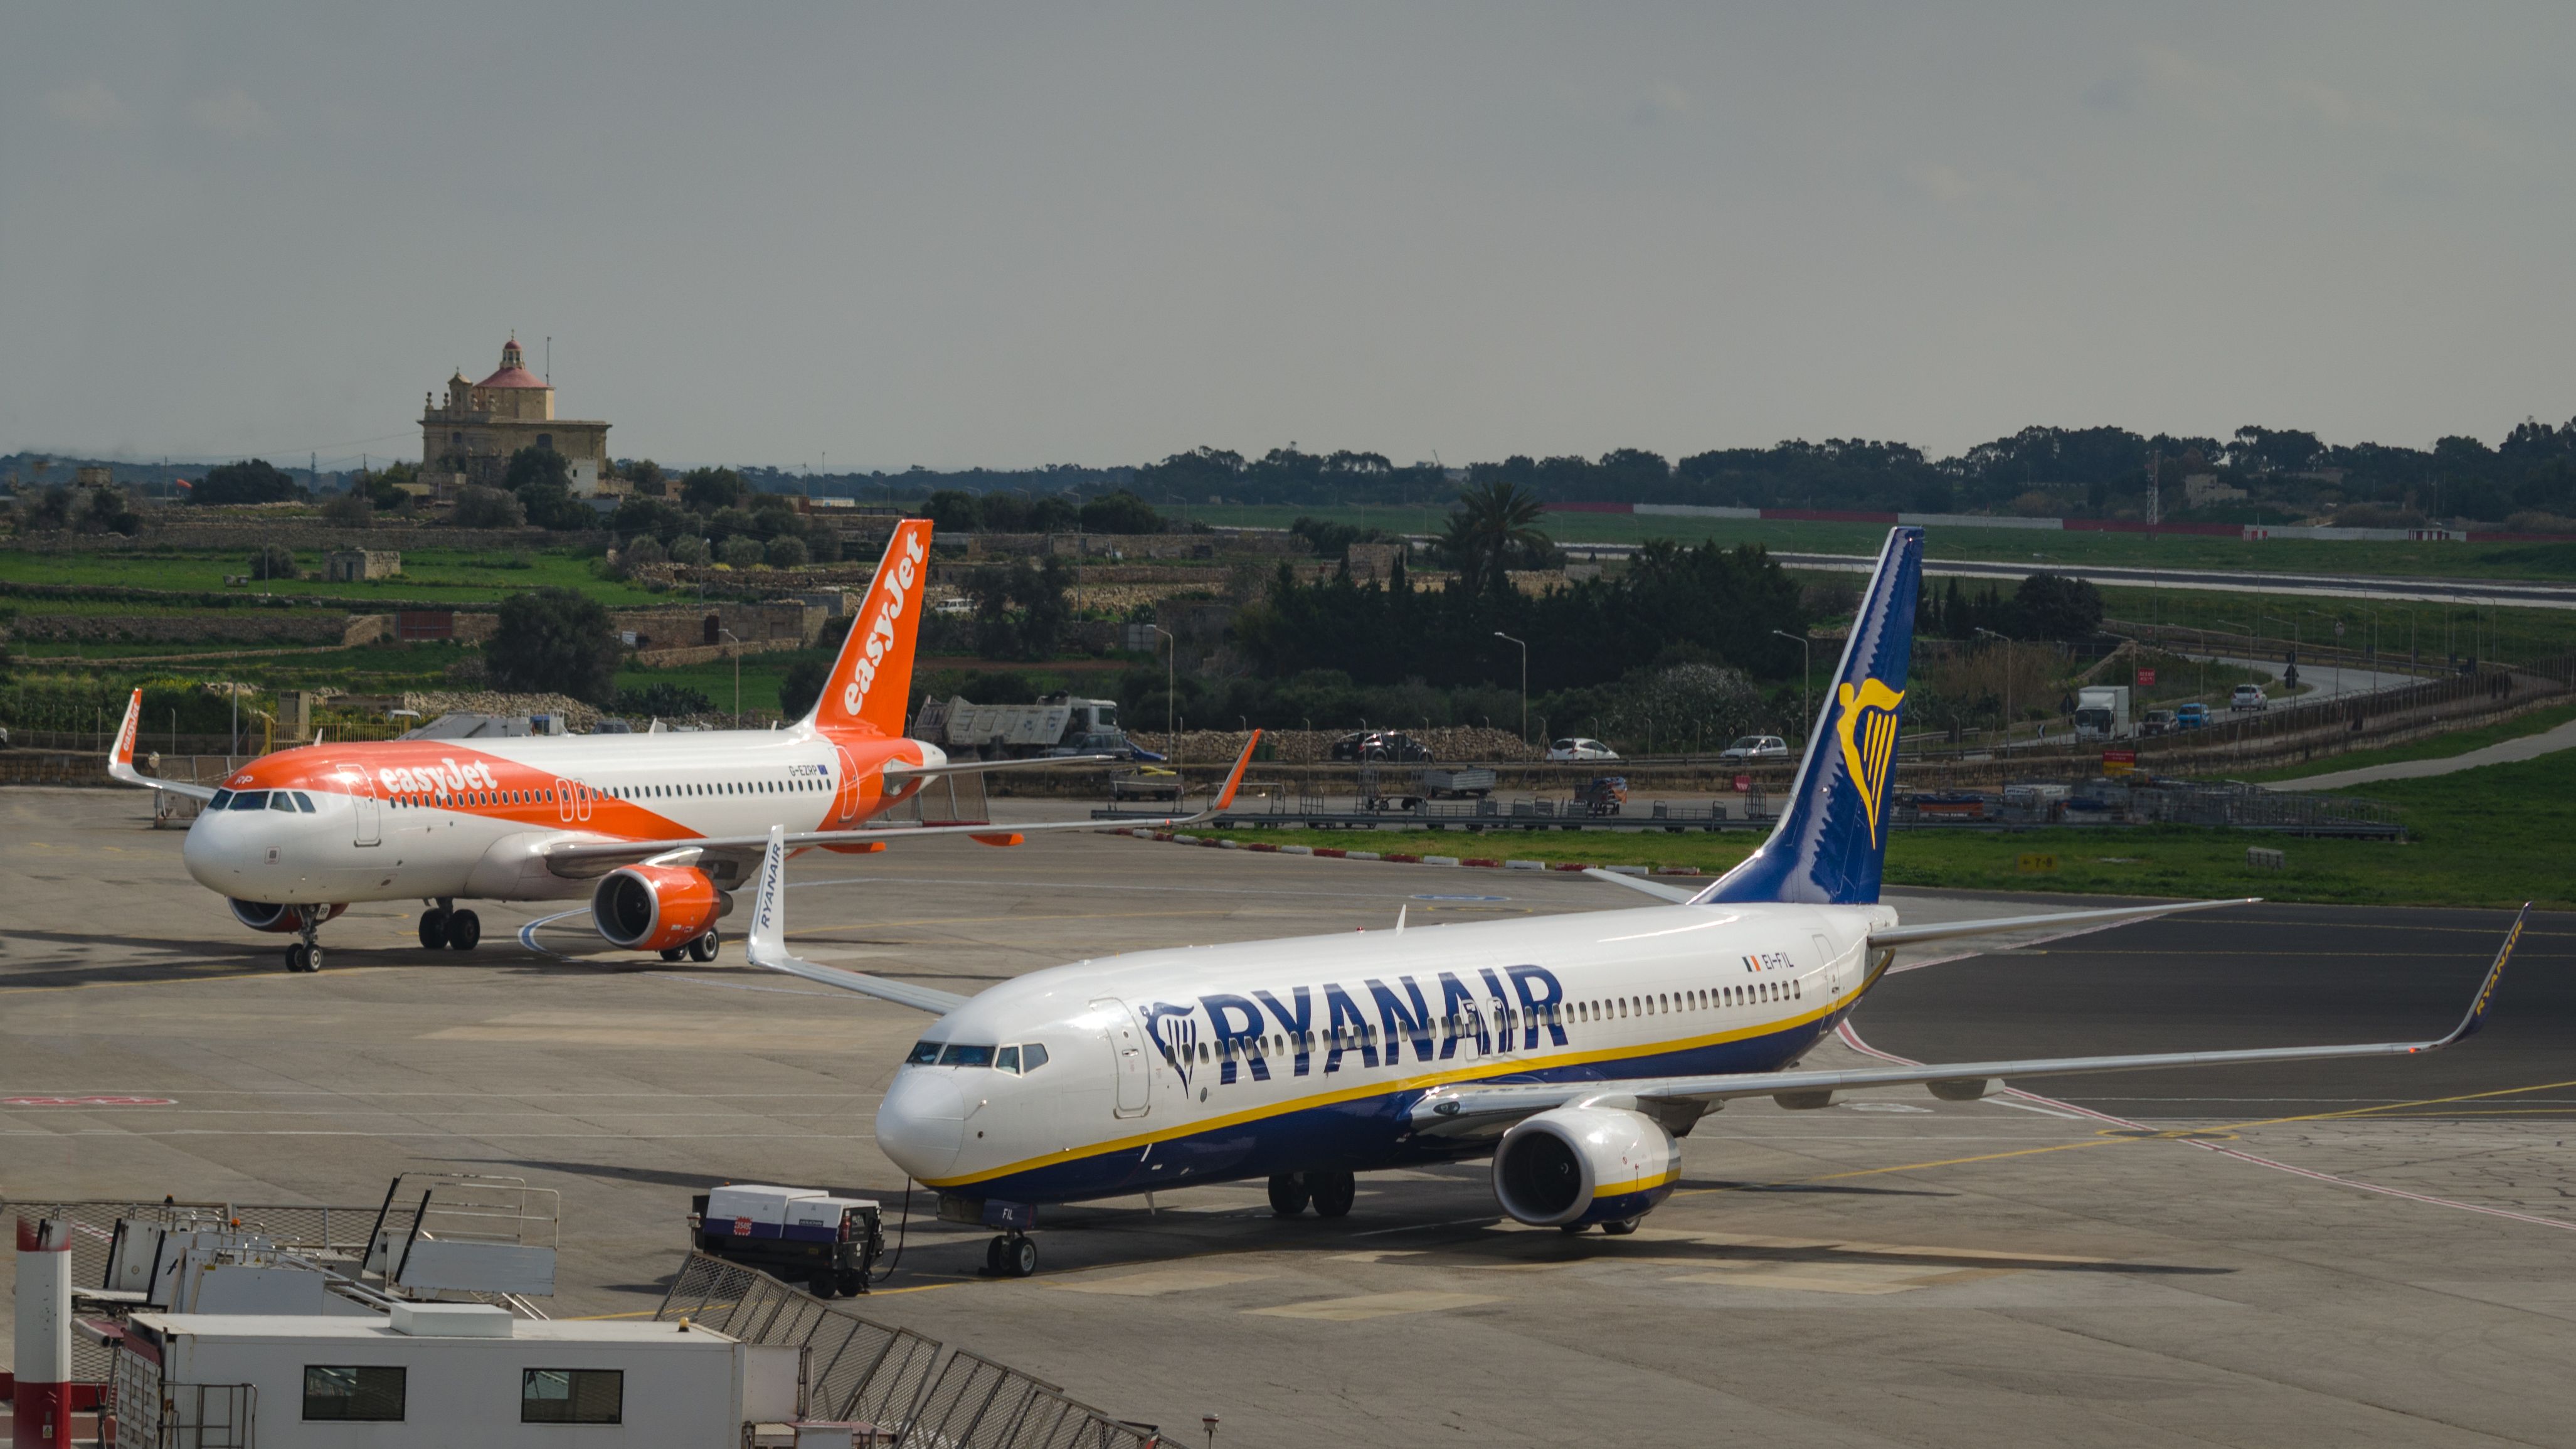 easyJet and Ryanair aircraft on the ground at Malta International Airport.